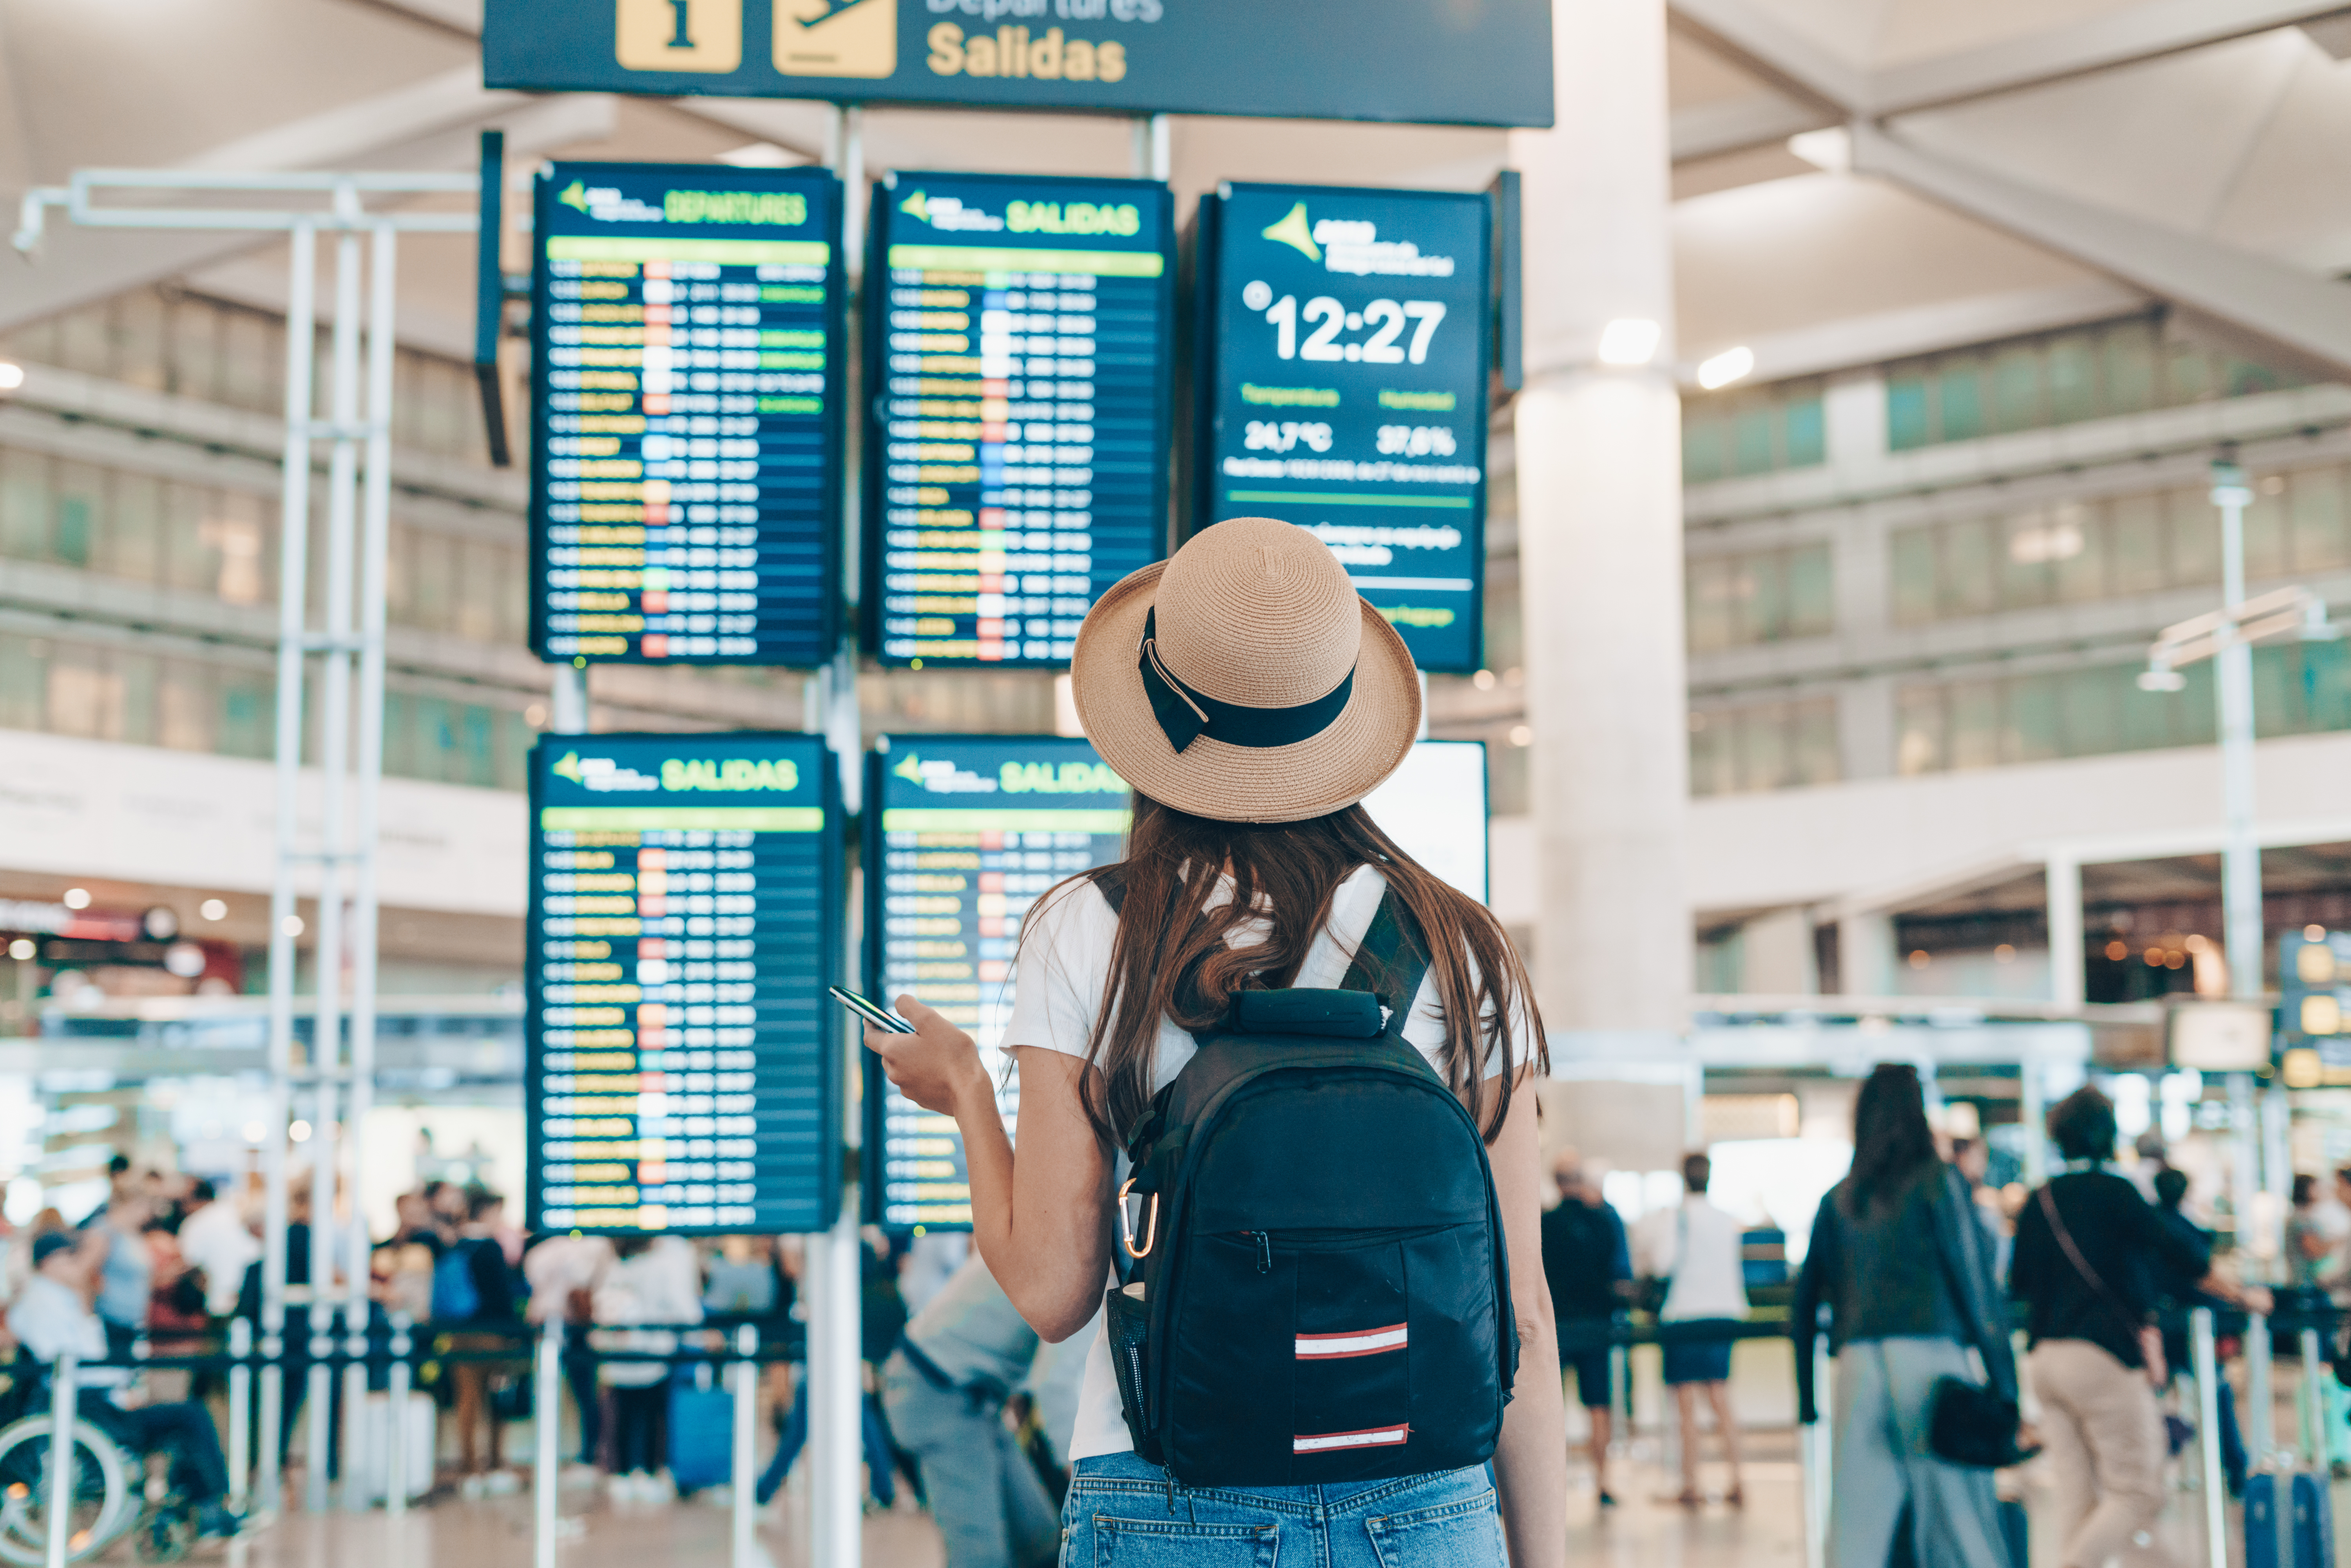 Woman at airport looking at flight schedule boards